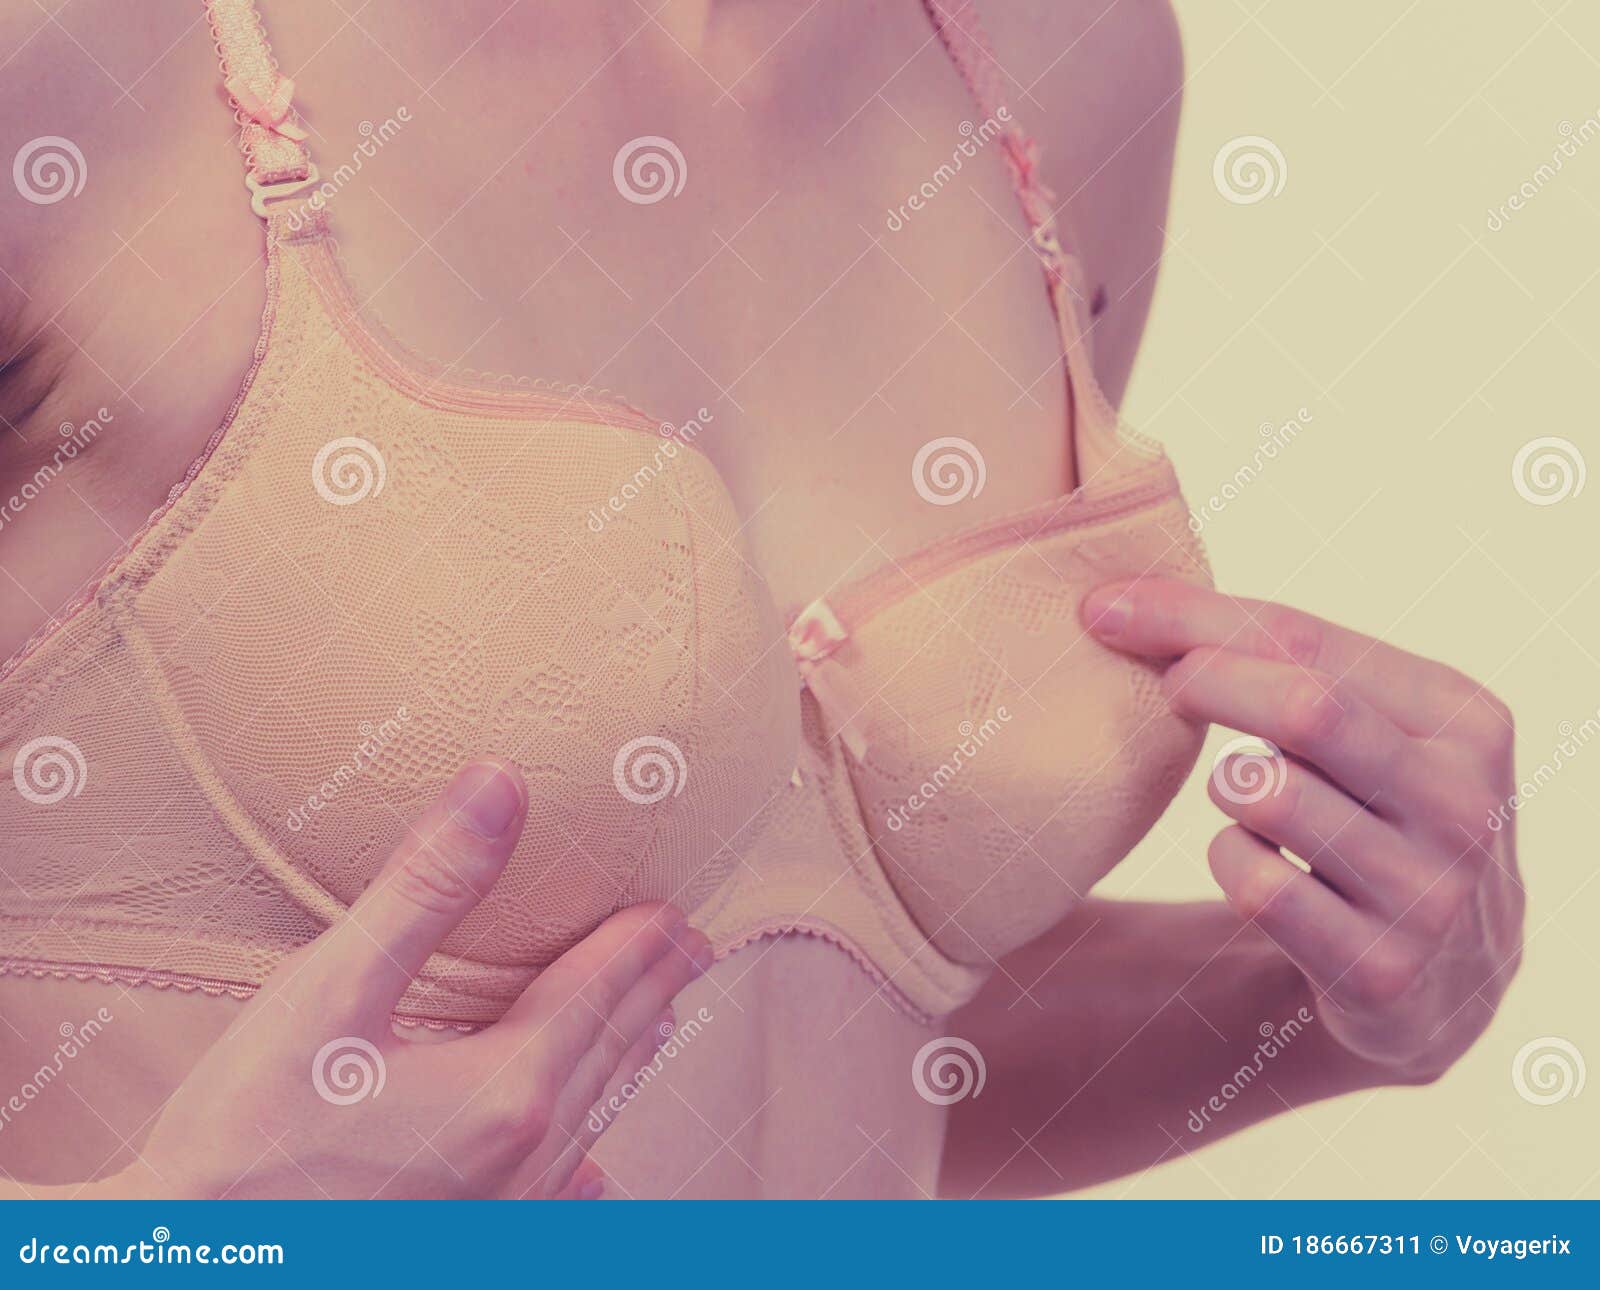 https://thumbs.dreamstime.com/z/slim-young-woman-small-boobs-wearing-too-big-bra-cup-female-breast-wrong-size-lingerie-bosom-brafitting-concept-girl-wearing-186667311.jpg